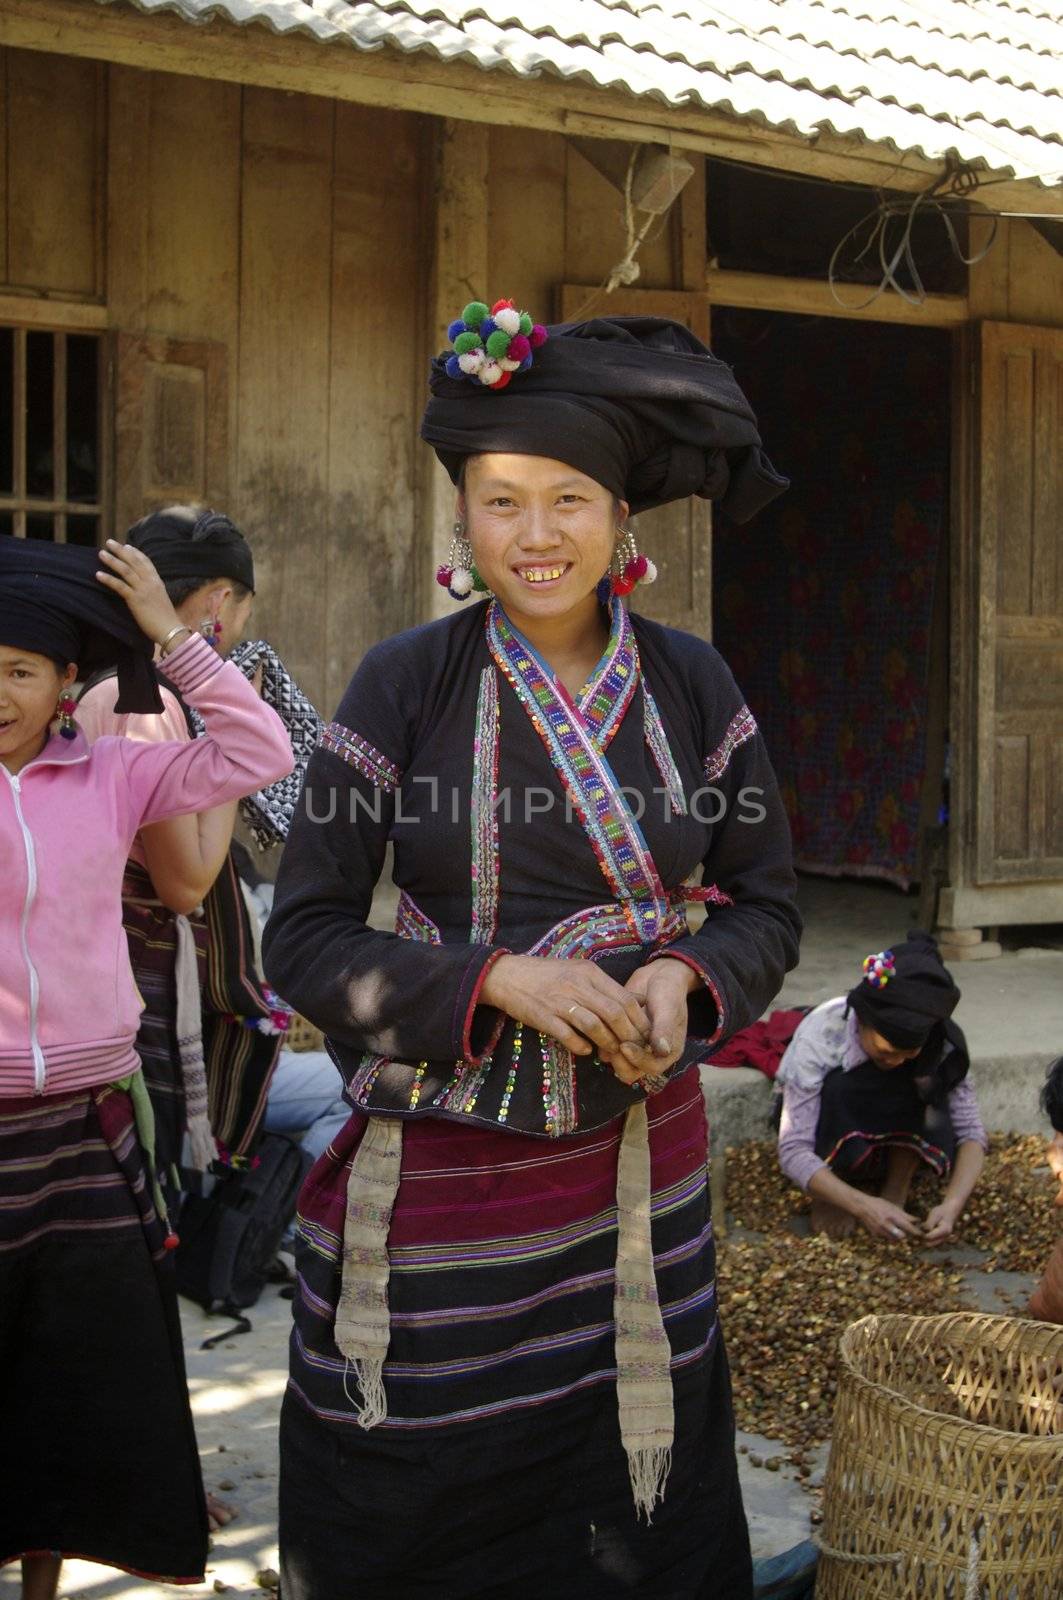 The Lu are an ethnic group of northern Vietnam. The costume of women consists of a shirt and indigo indigo skirt with decorative designs. They wear neck a silver collar connected by chains. On the head with a turban tilted indigo patterns